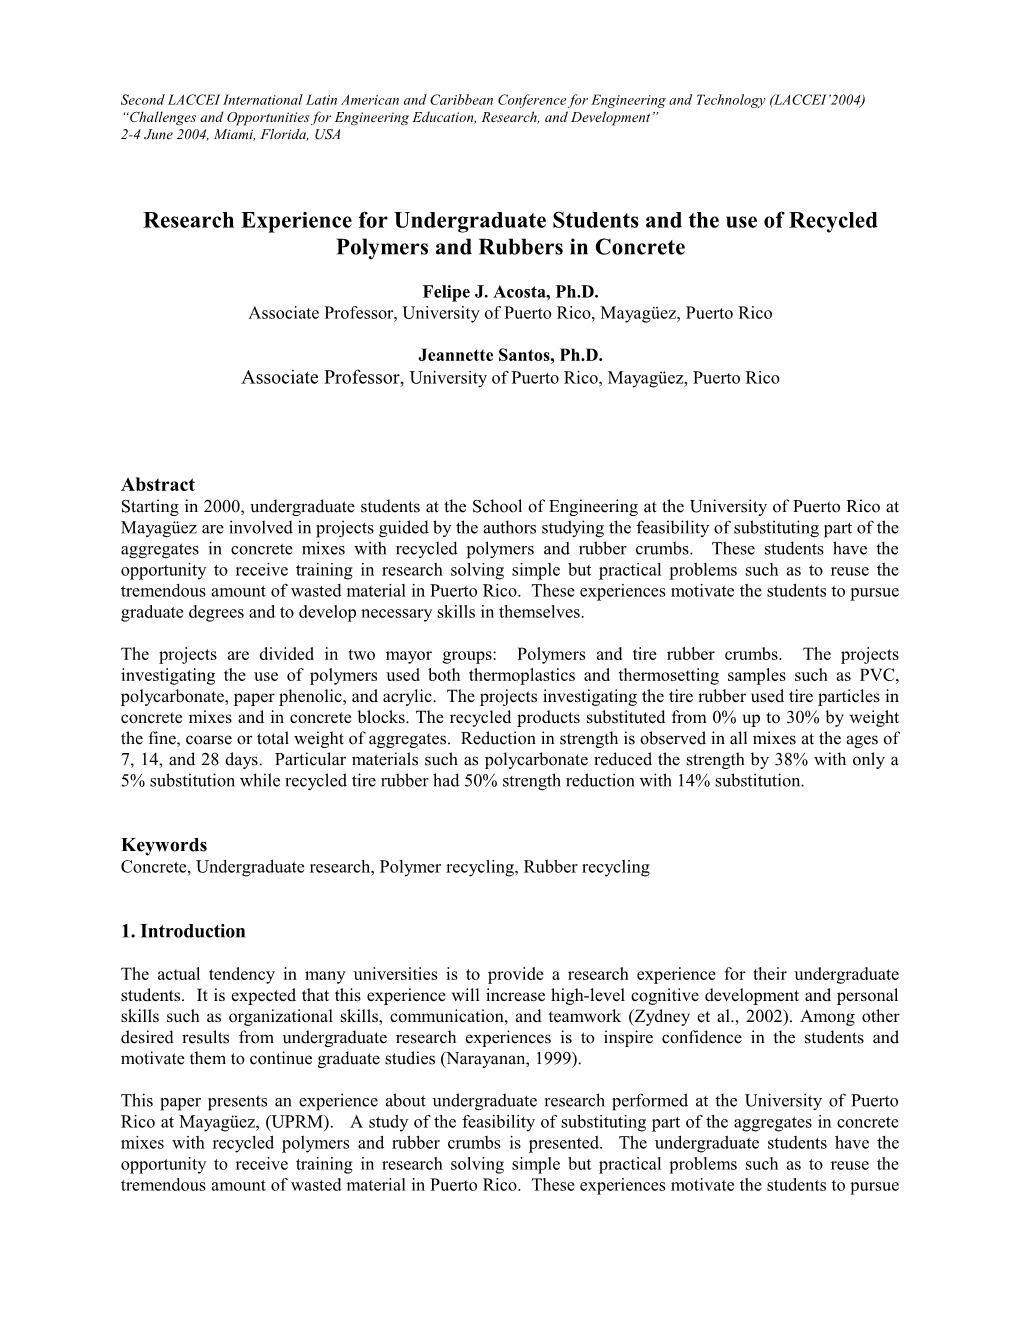 Research Experience for Undergraduate Students and the Use of Recycled Polymers and Rubbers